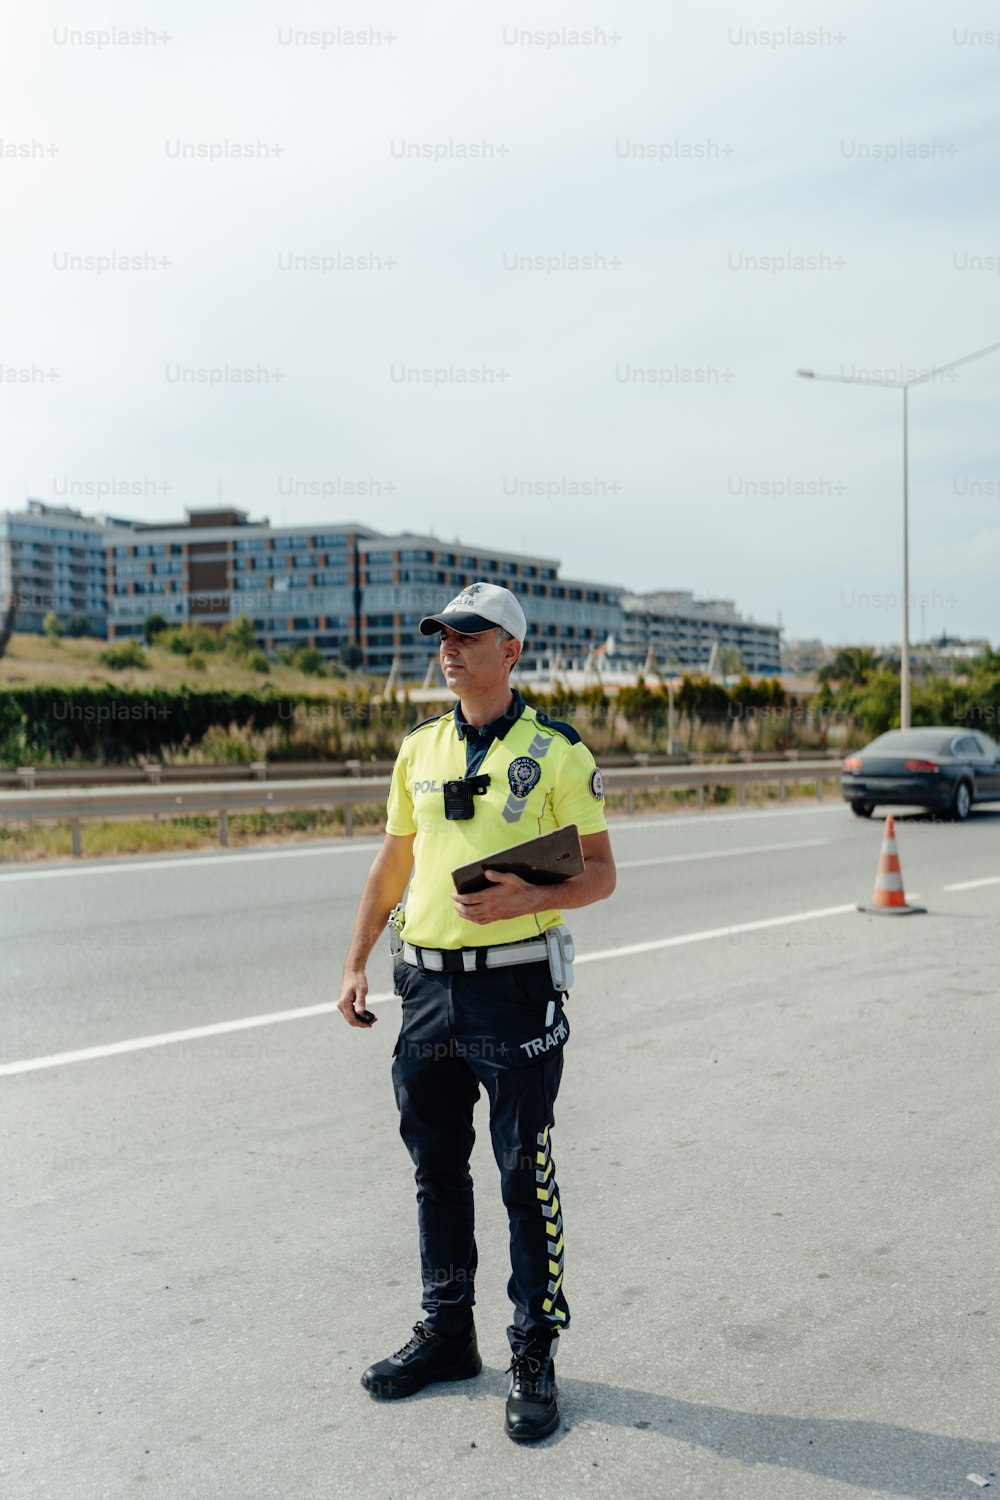 a police officer standing on the side of the road